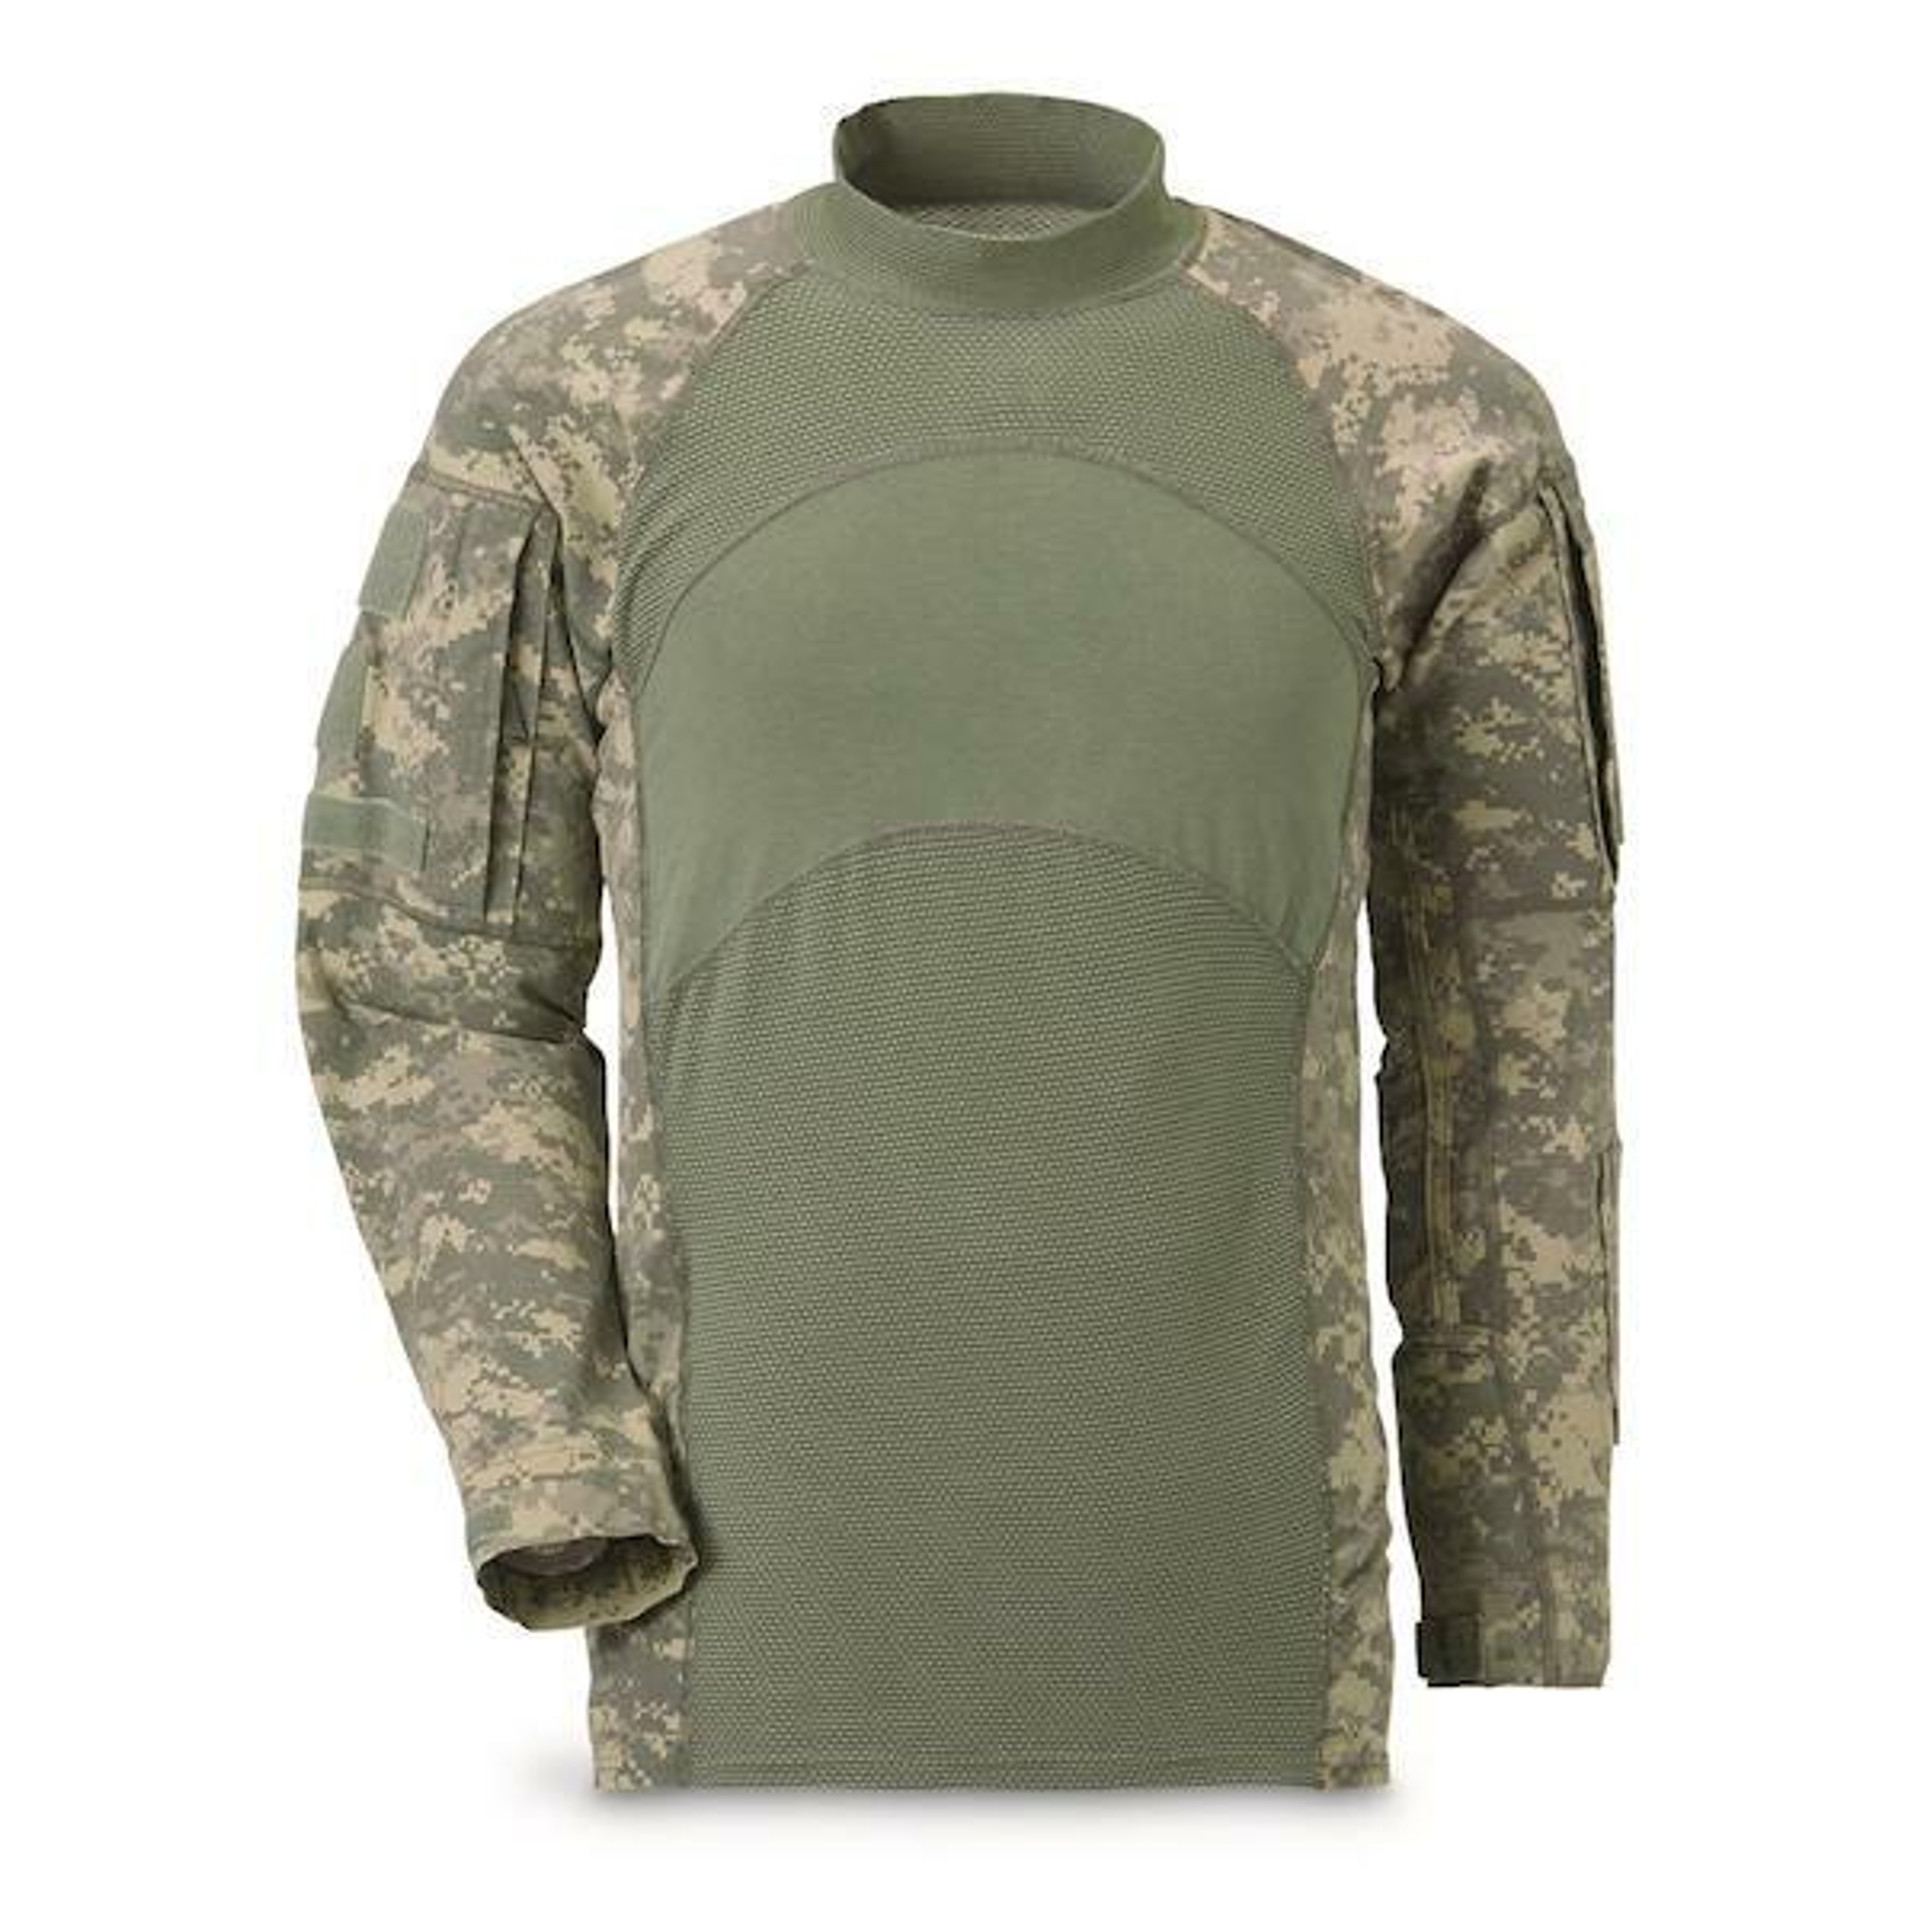 Military Surplus Gear | Army Navy Outdoors